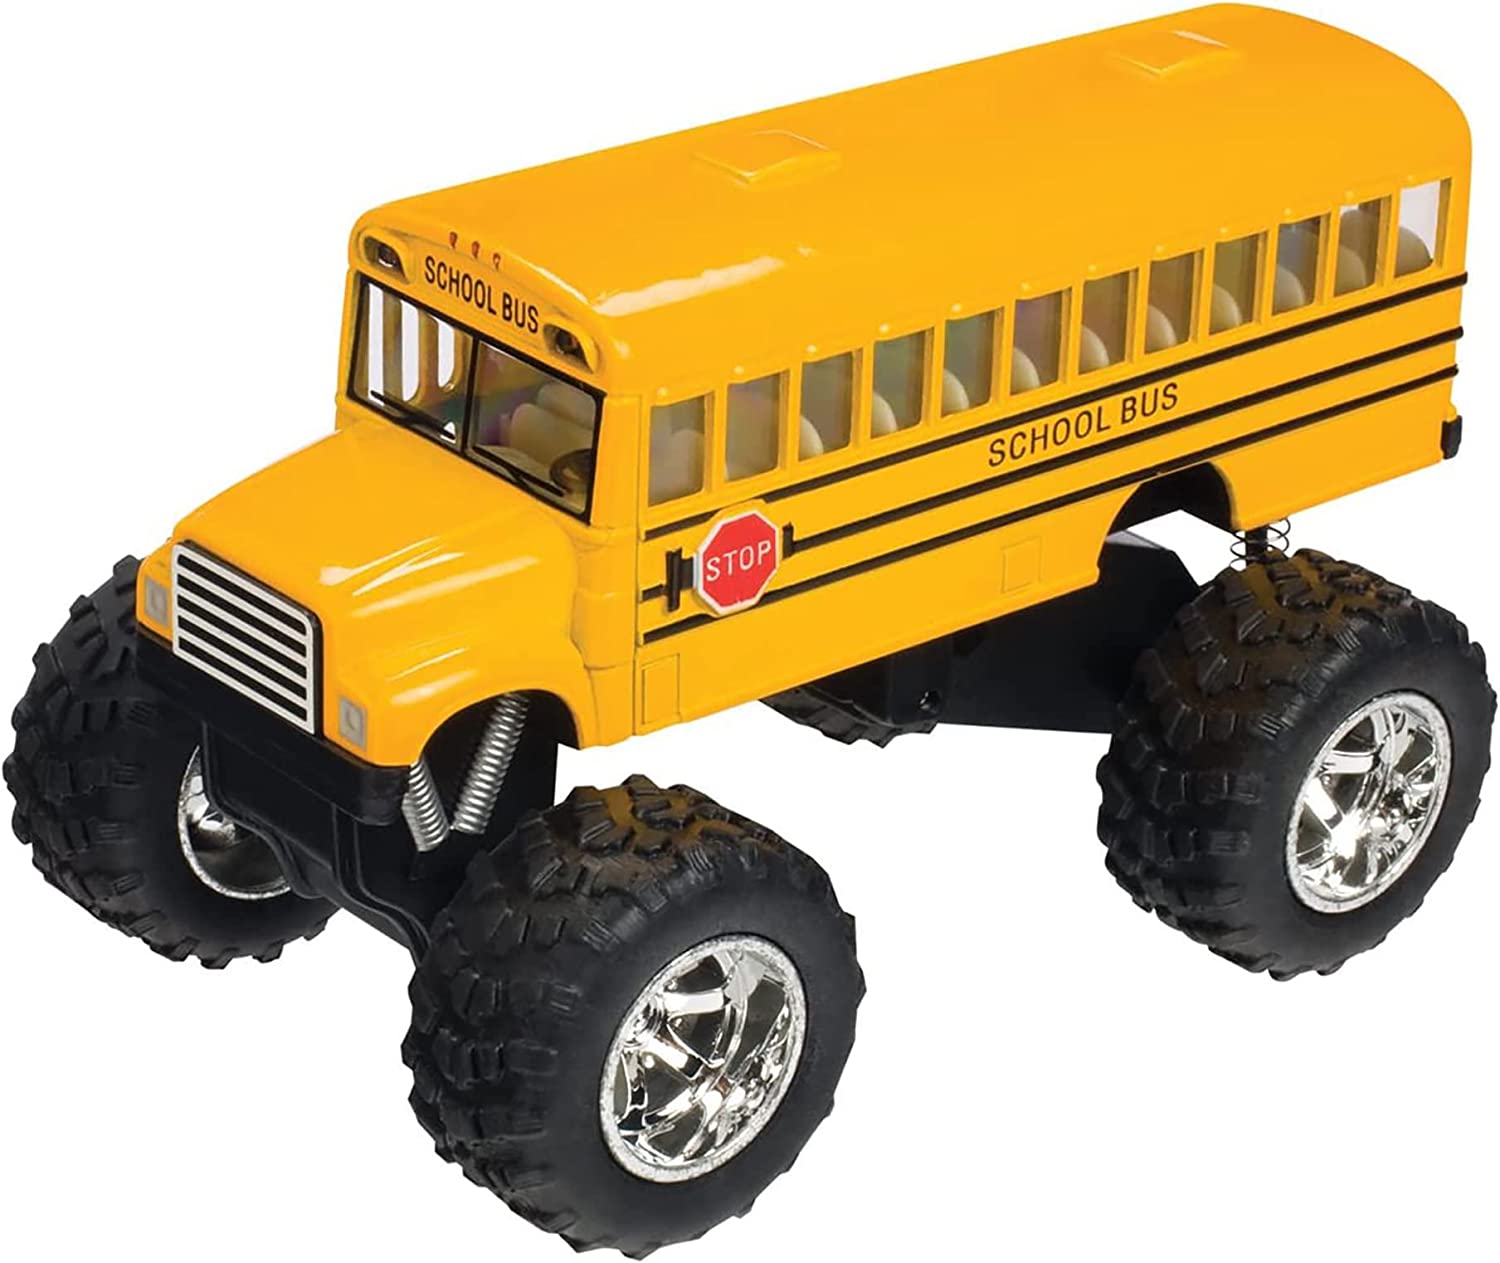 Toysmith 5020 Monster Bus, 5-Inch - image 2 of 7